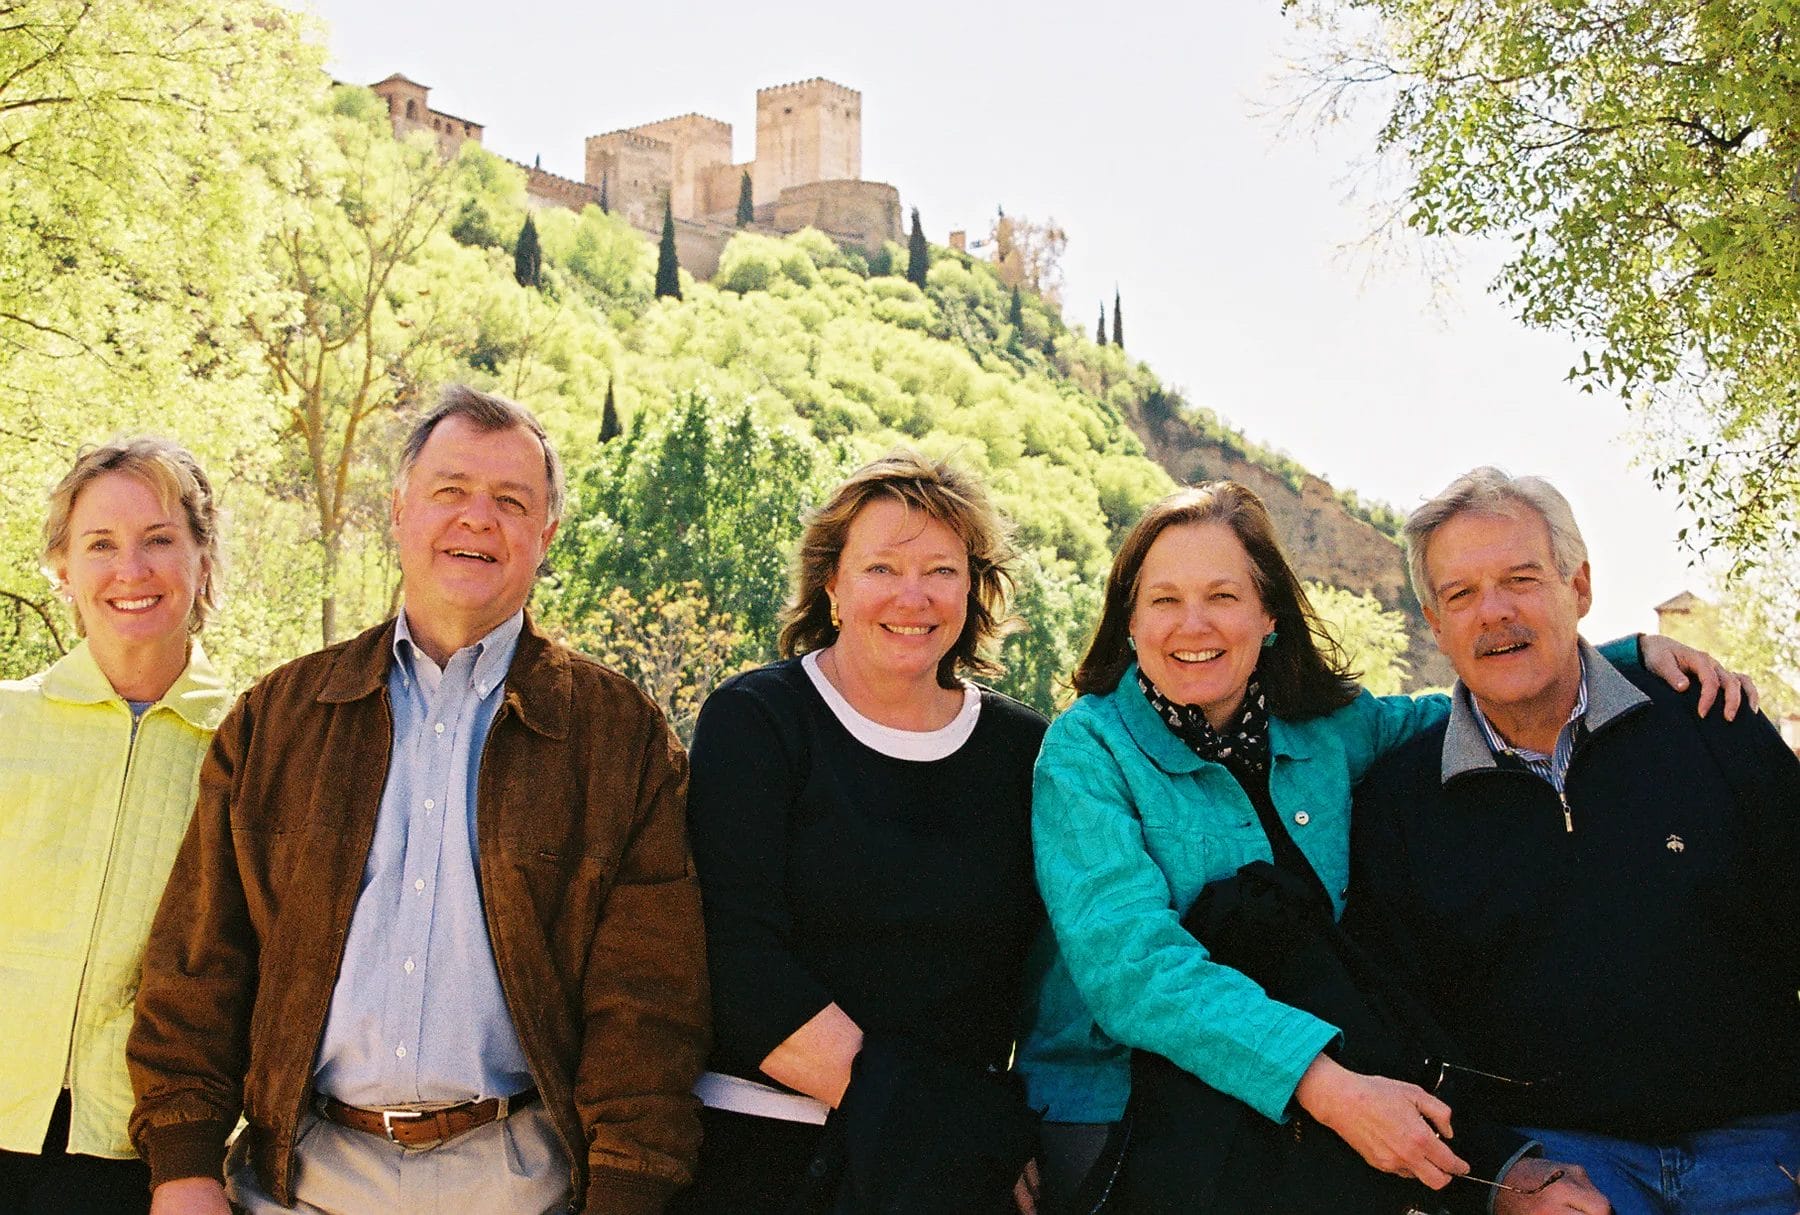 Private Luxury Tour Planner With Friends In Spain.jpg